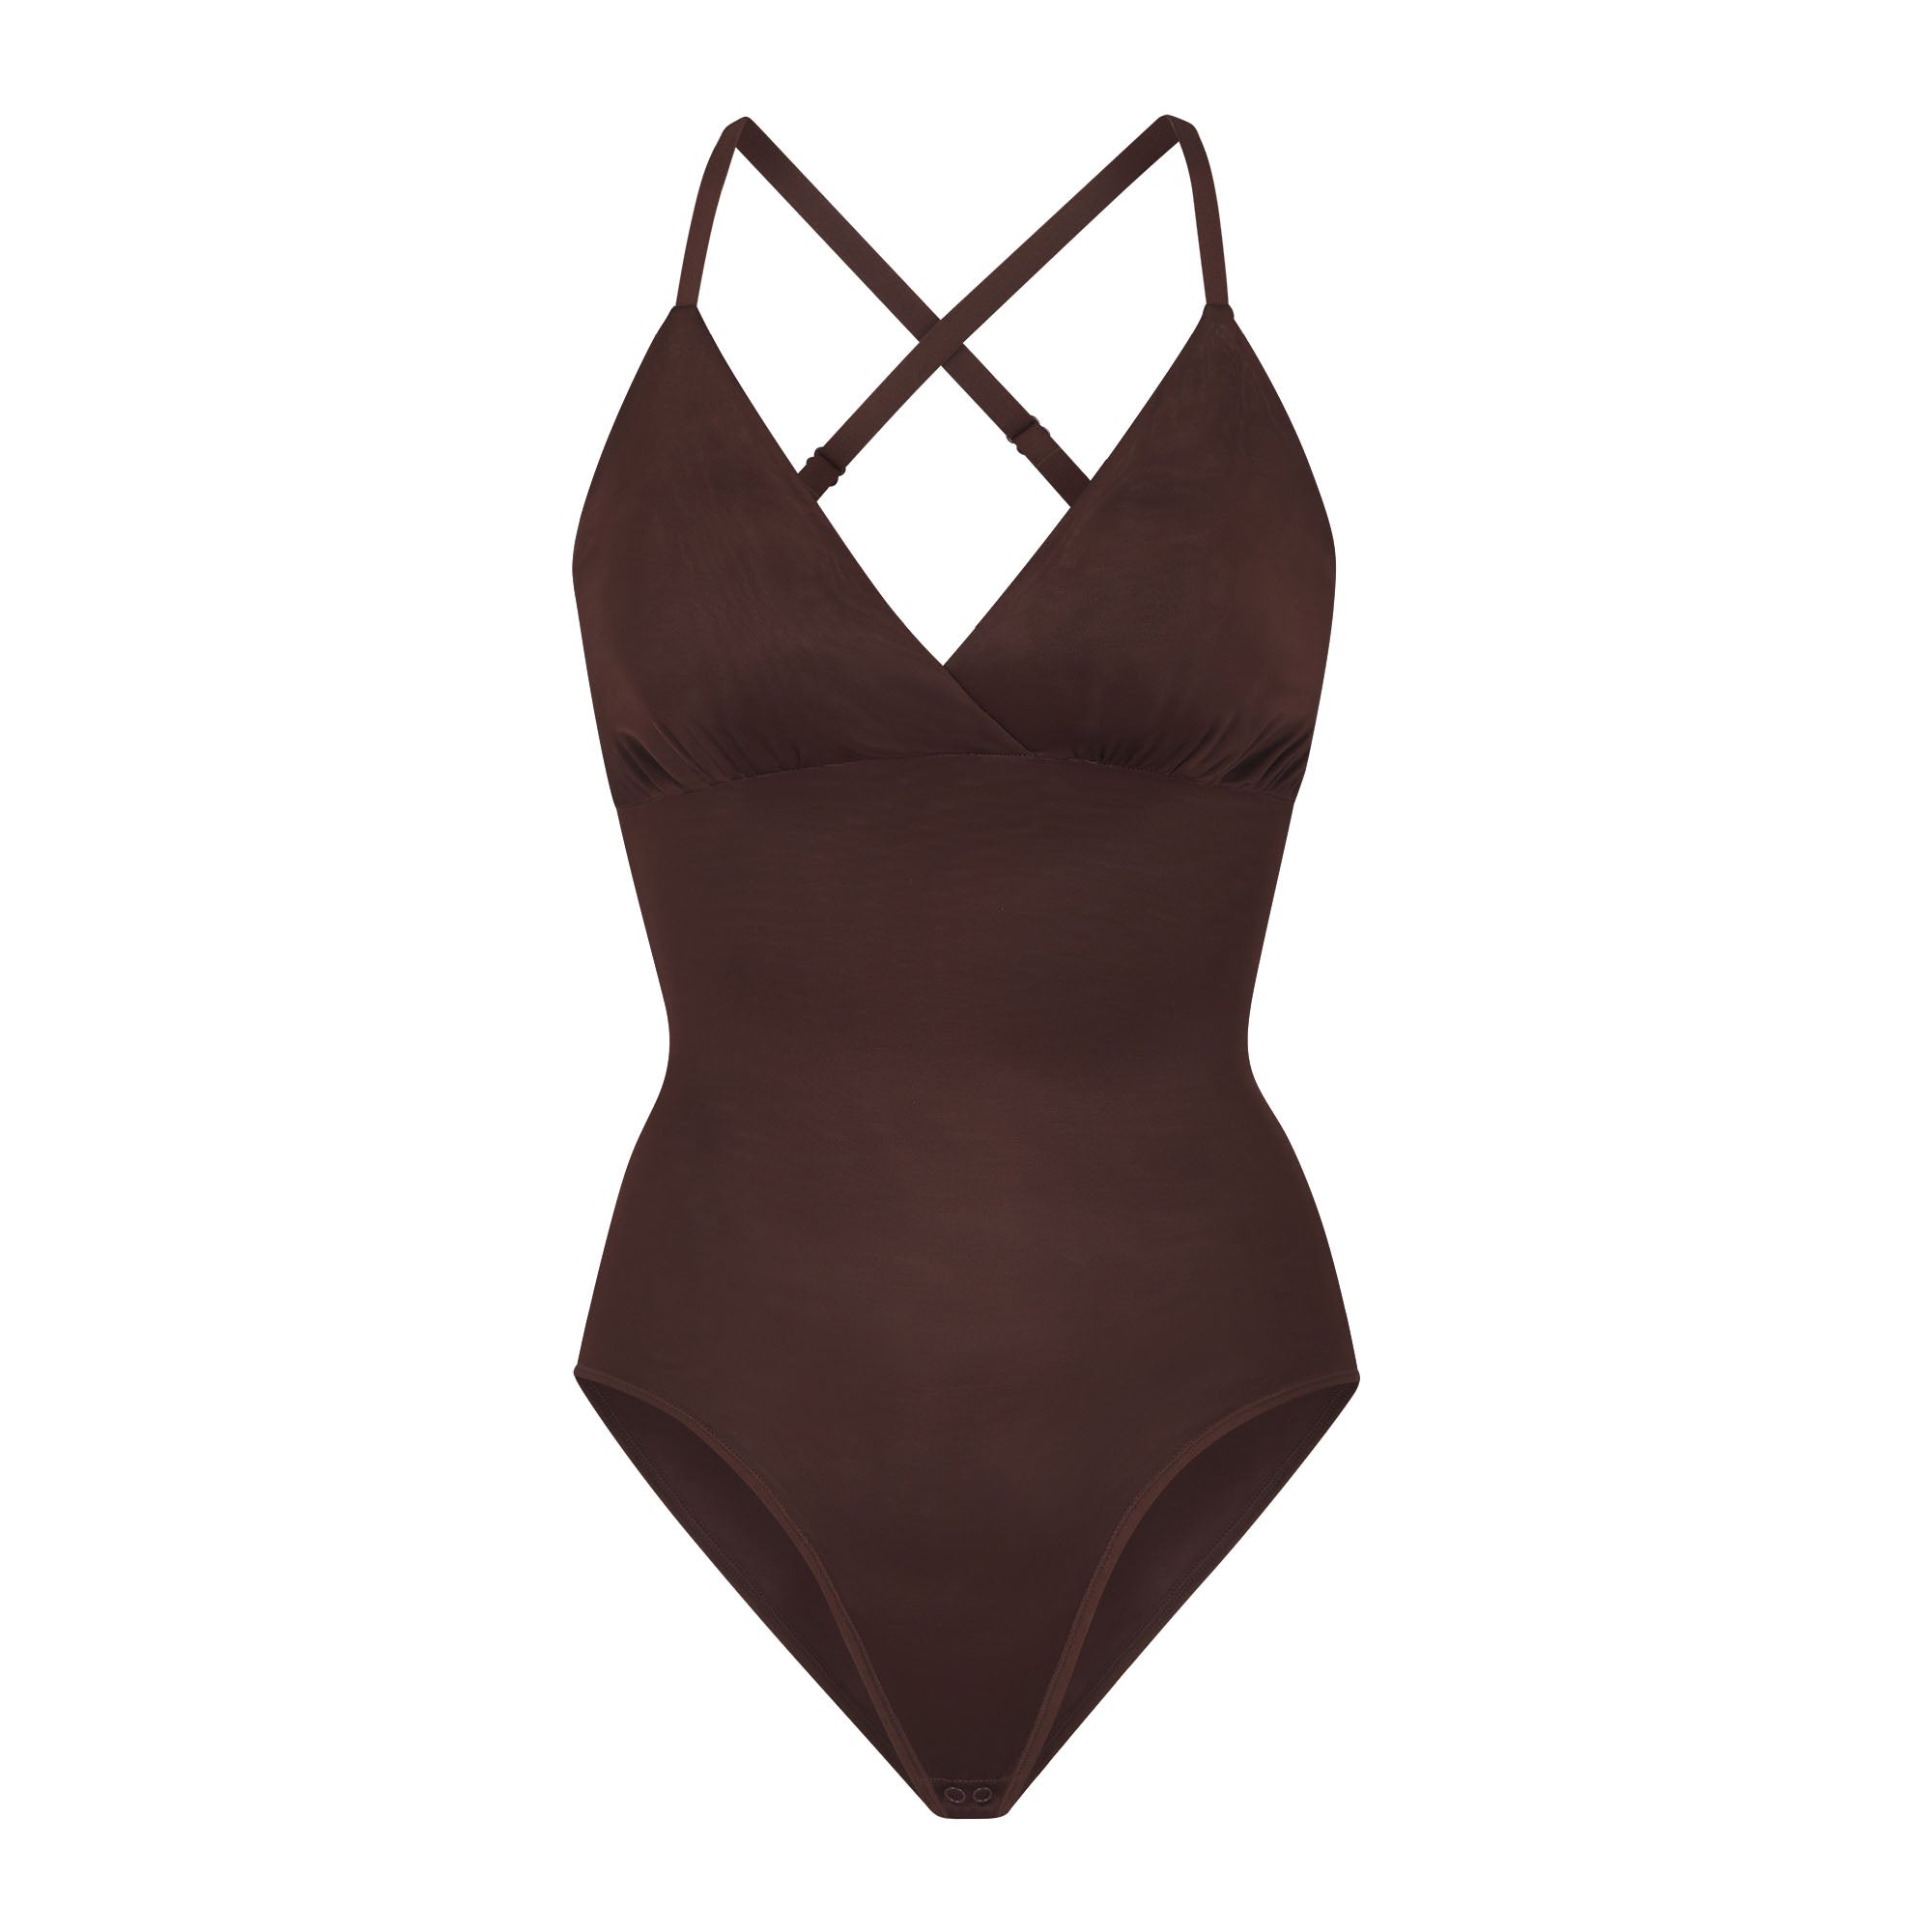 BARELY THERE BODYSUIT BRIEF W/ SNAPS | COCOA